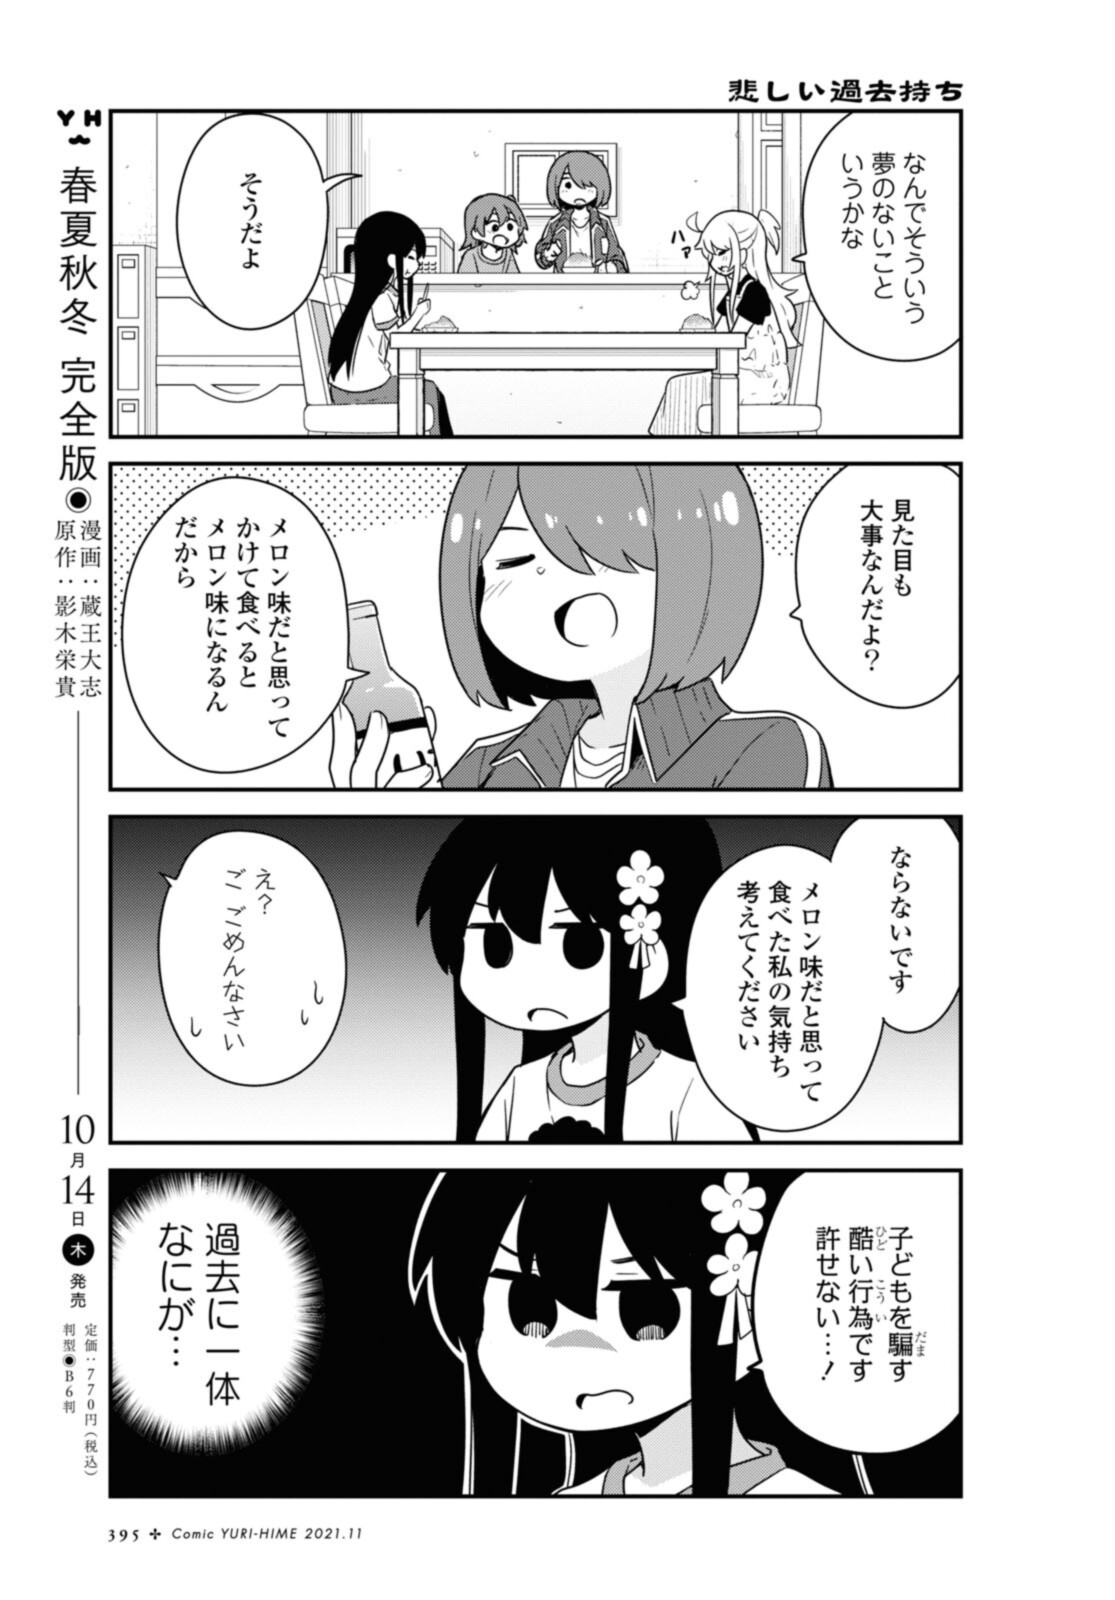 Wataten! An Angel Flew Down to Me 私に天使が舞い降りた！ 第88話 - Page 8